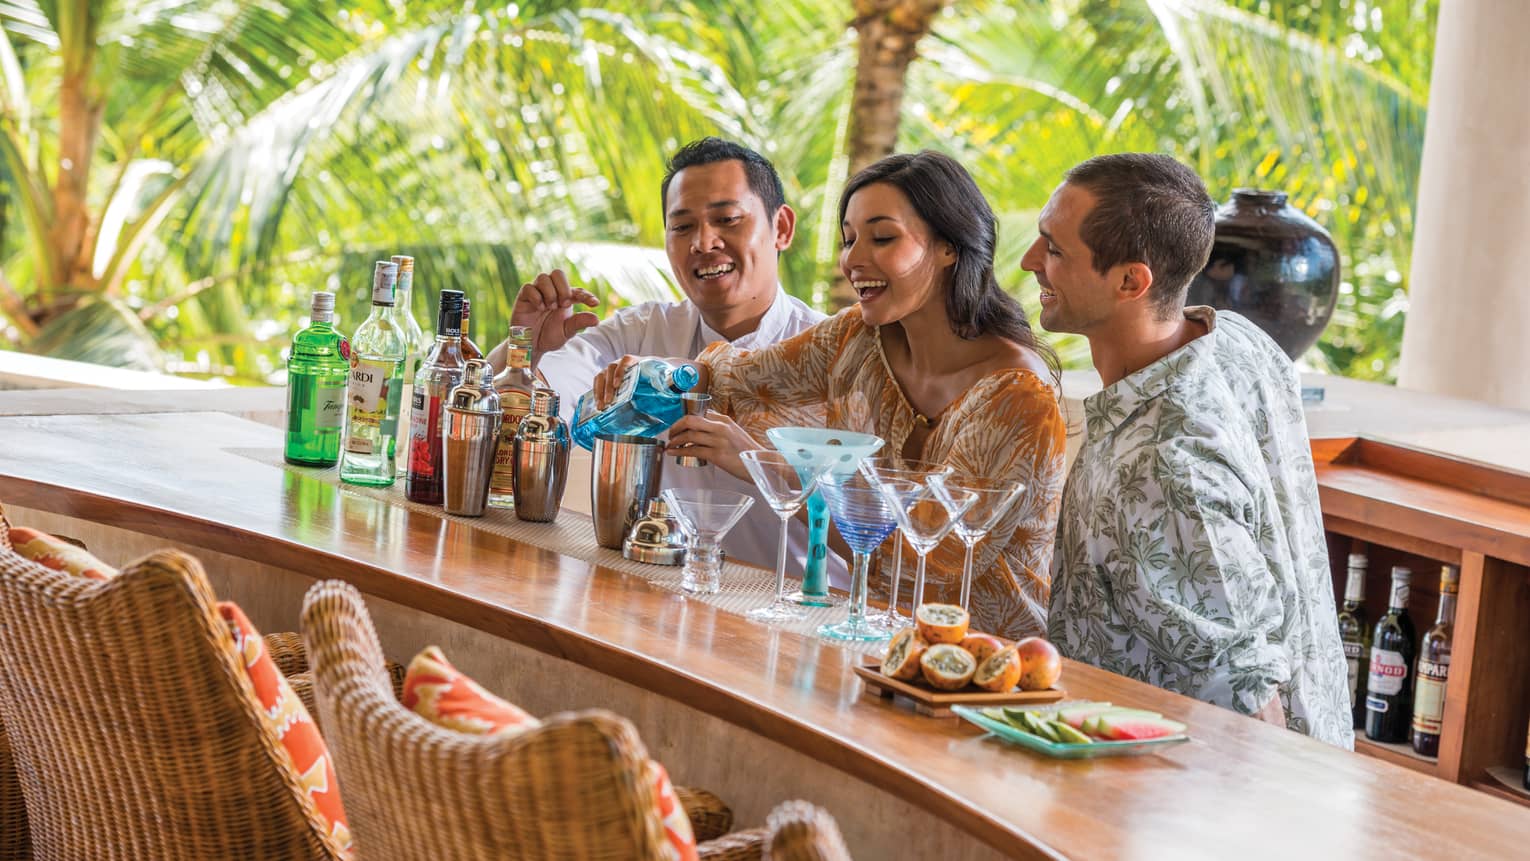 Guests learning how to mix drinks at a cocktail class in Bali